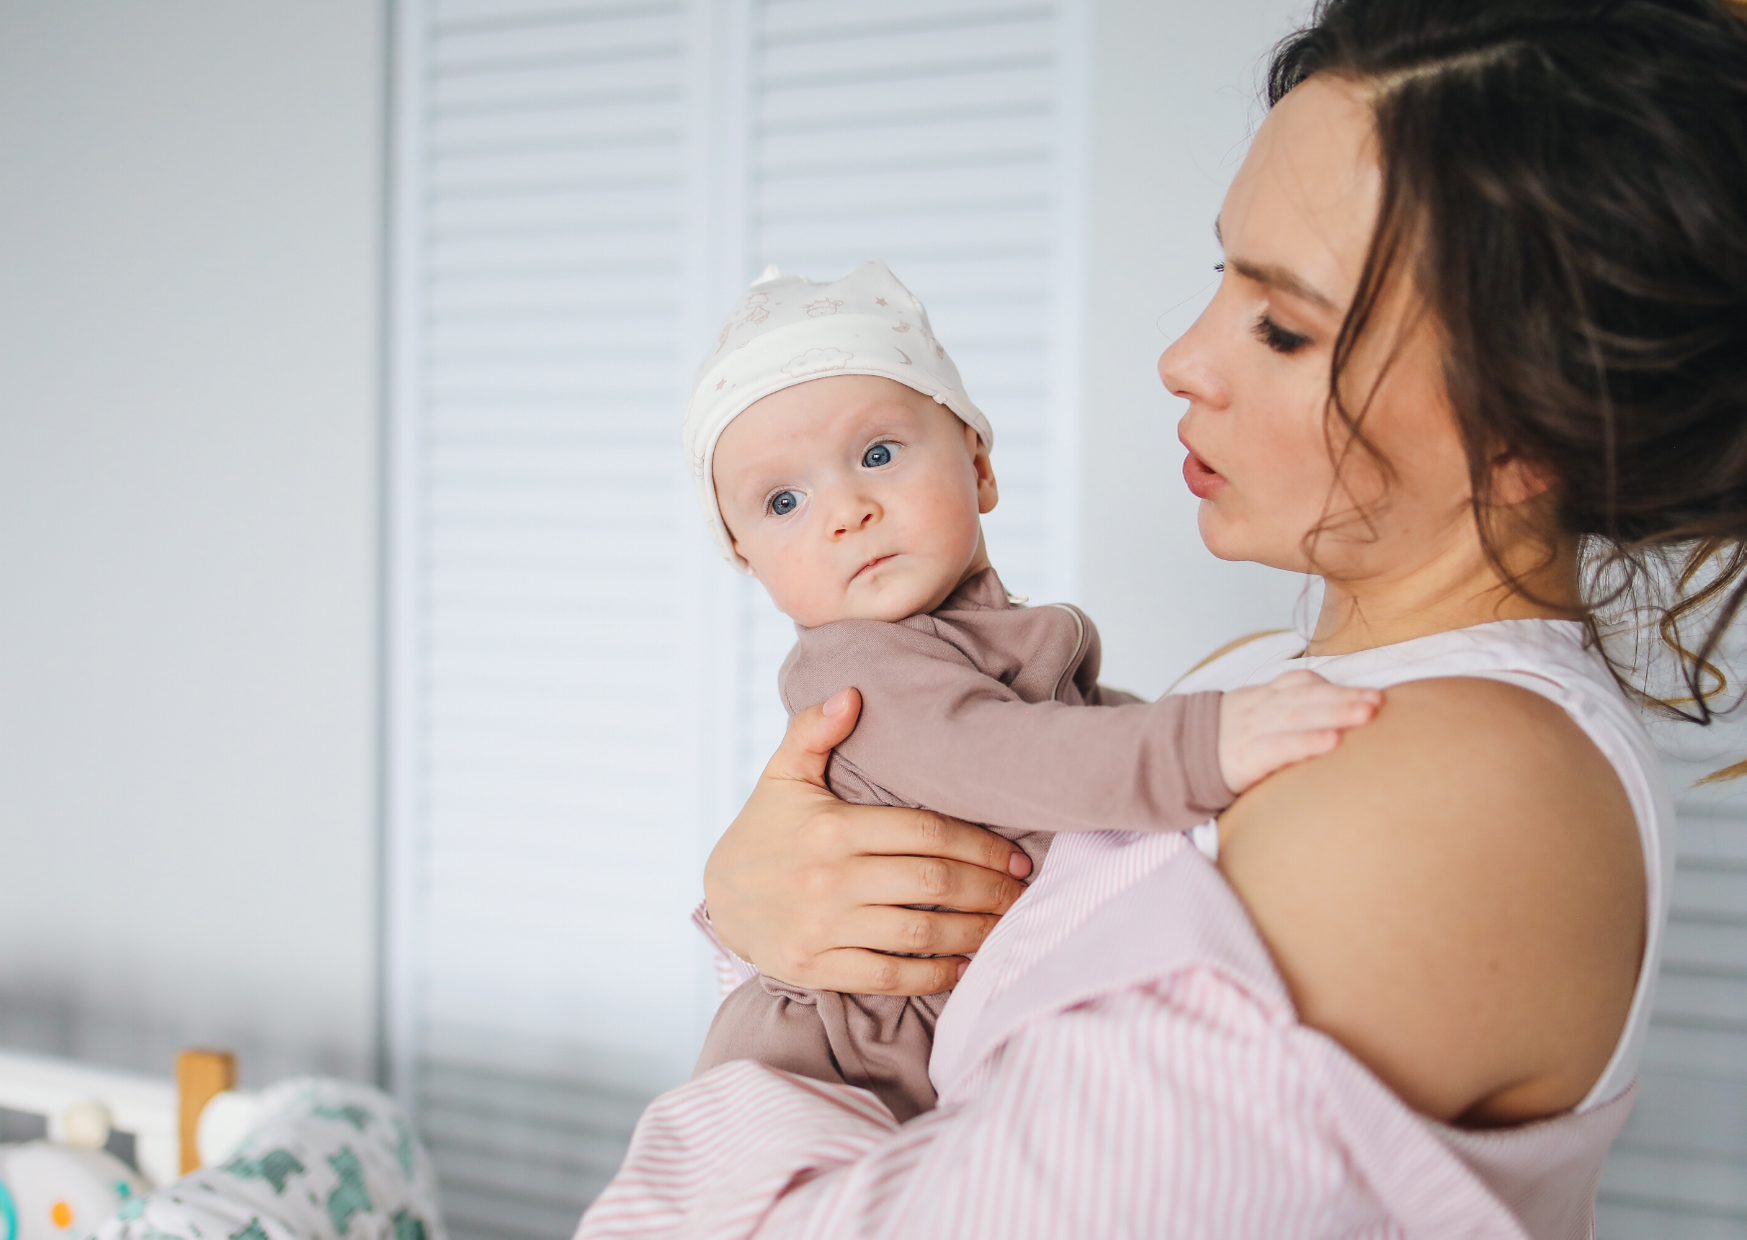 can laxatives be taken while breastfeeding?